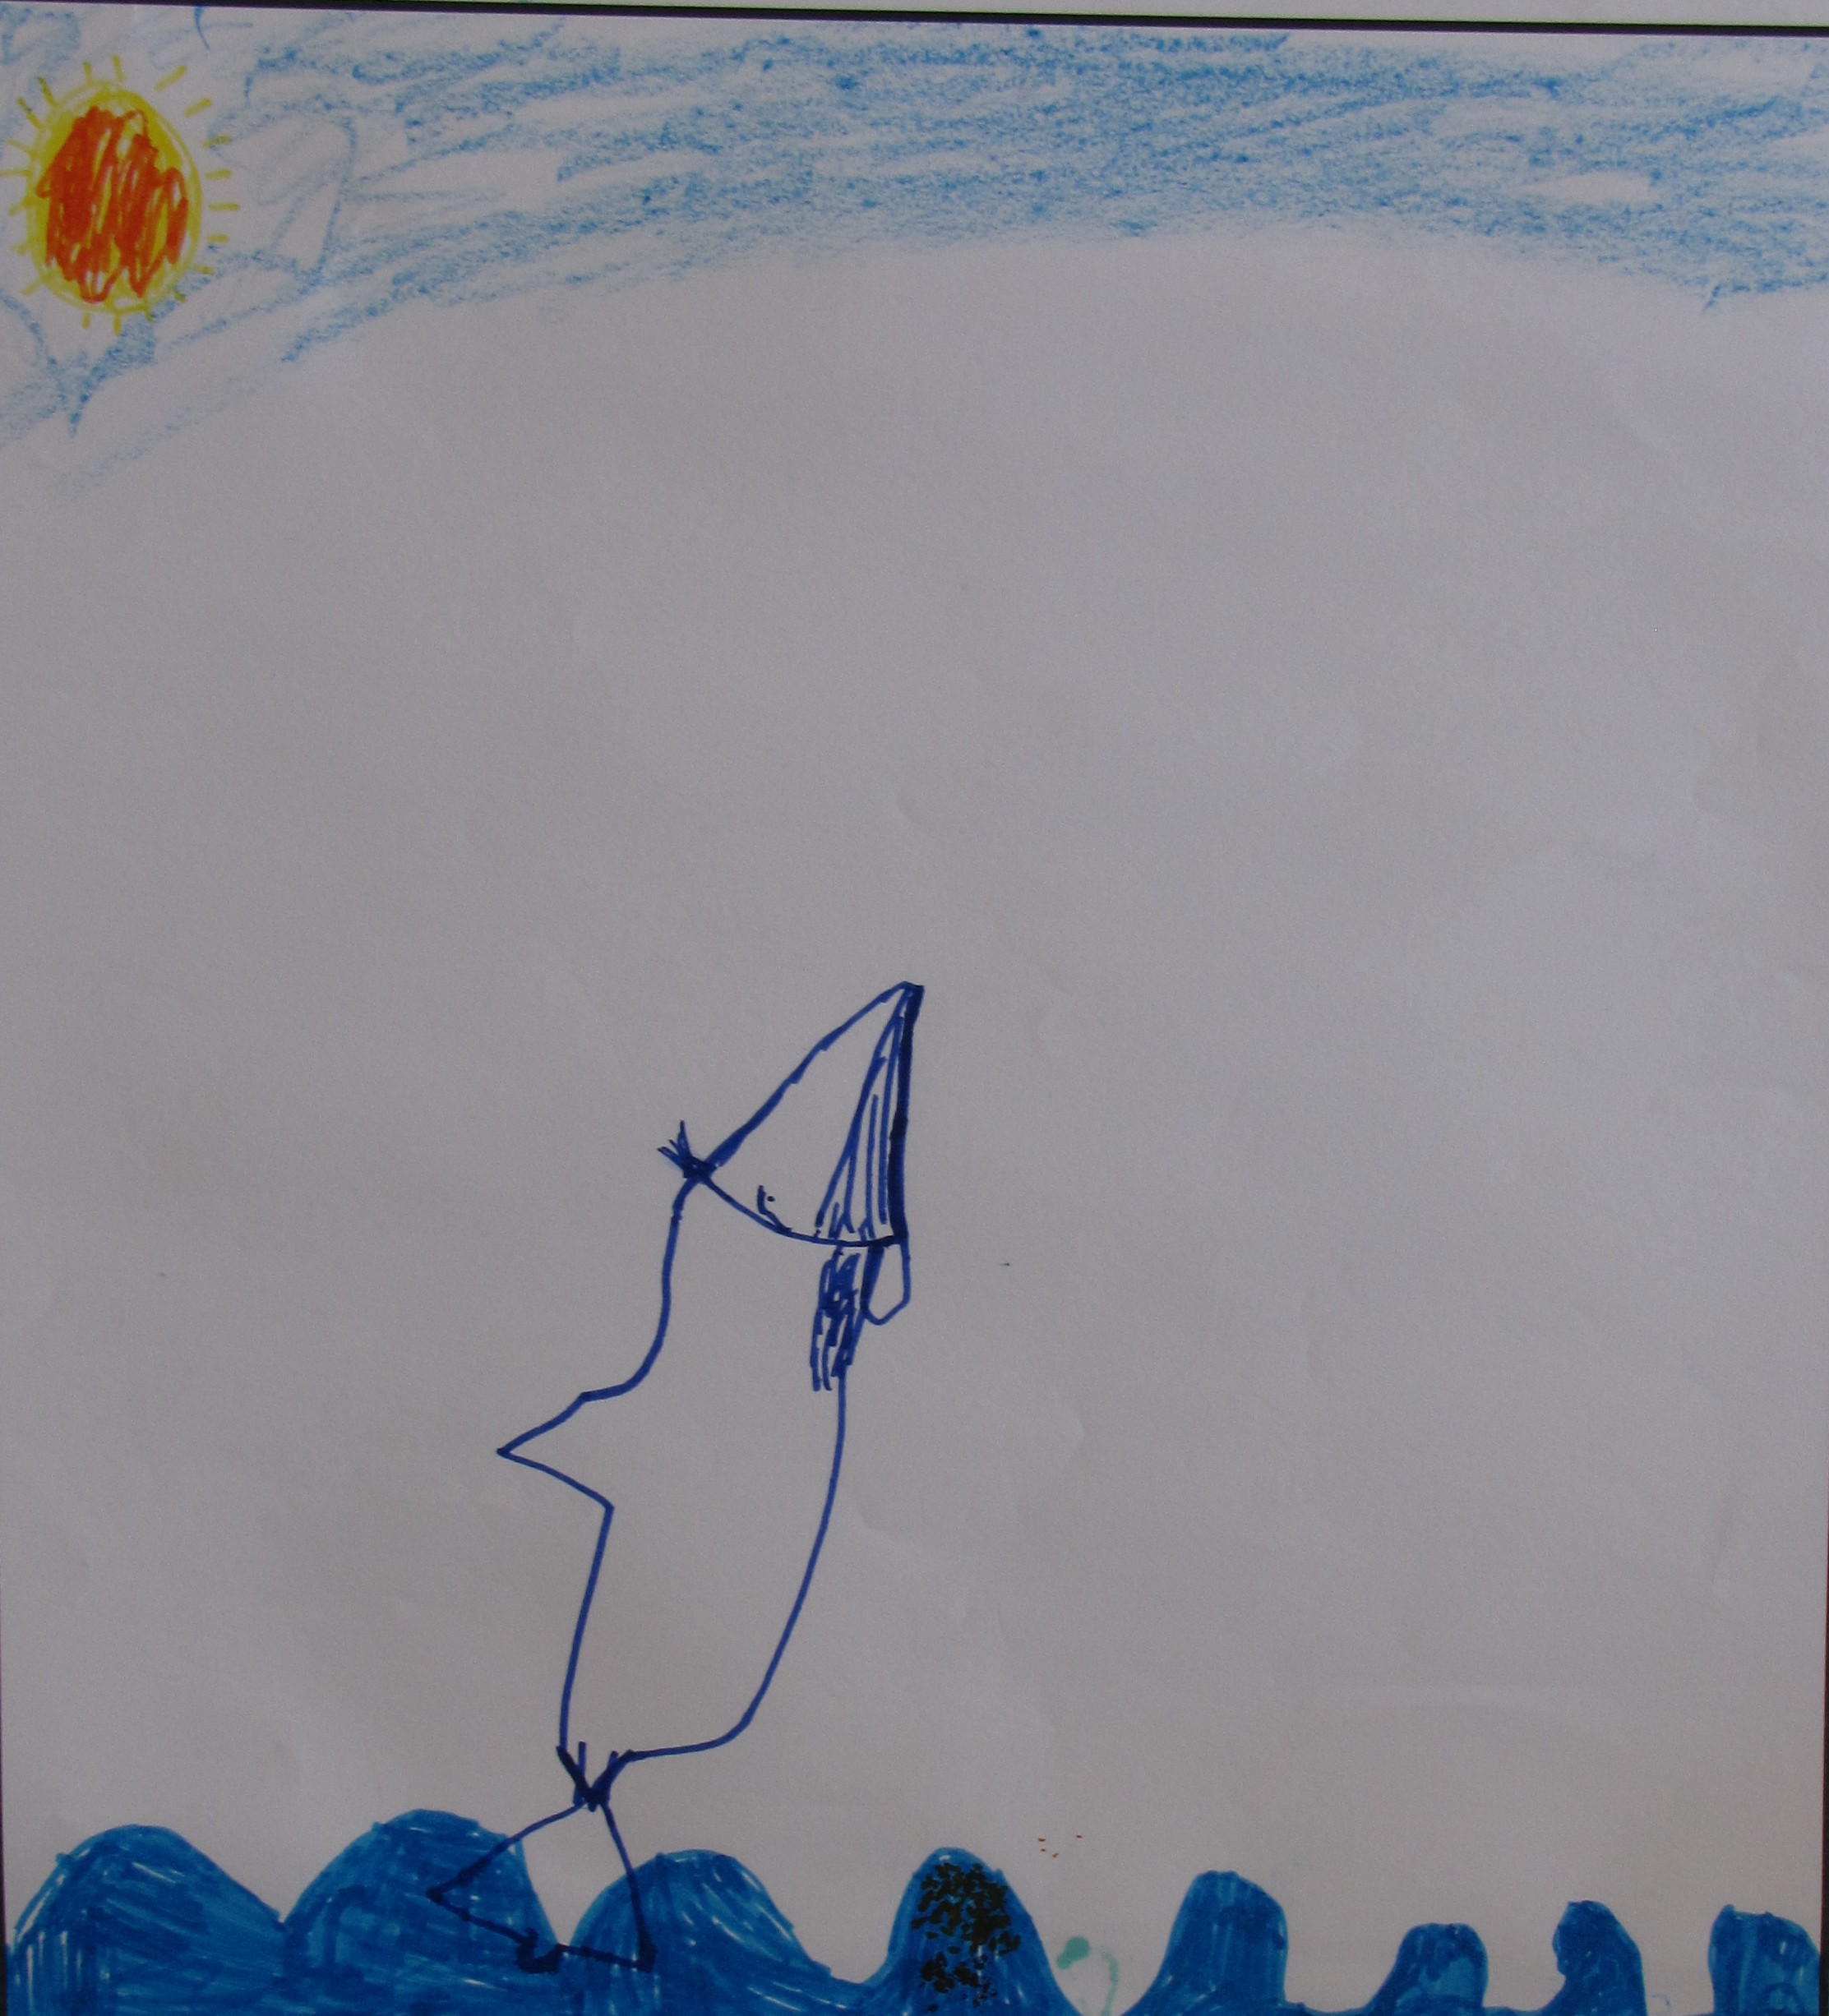 'Highlander' by Jessica McNeilly, Age 7.